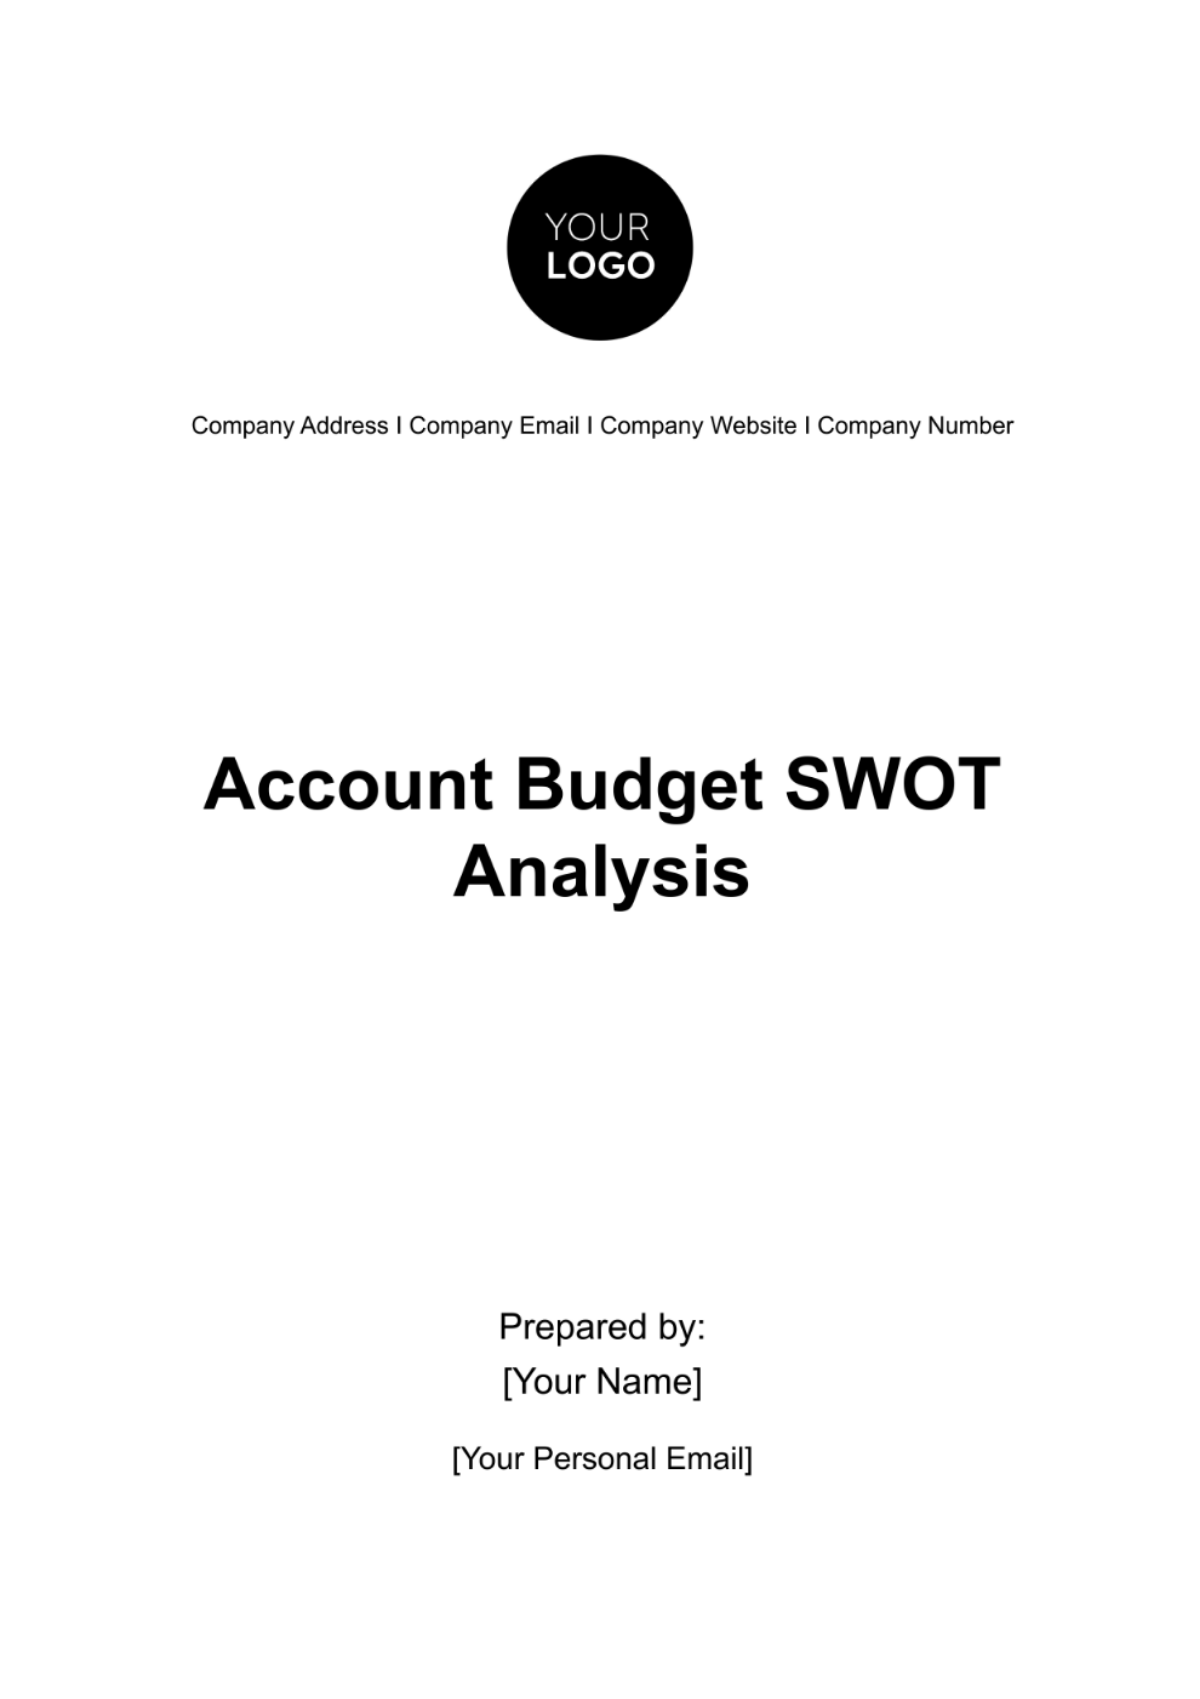 Free Account Budget SWOT Analysis Template